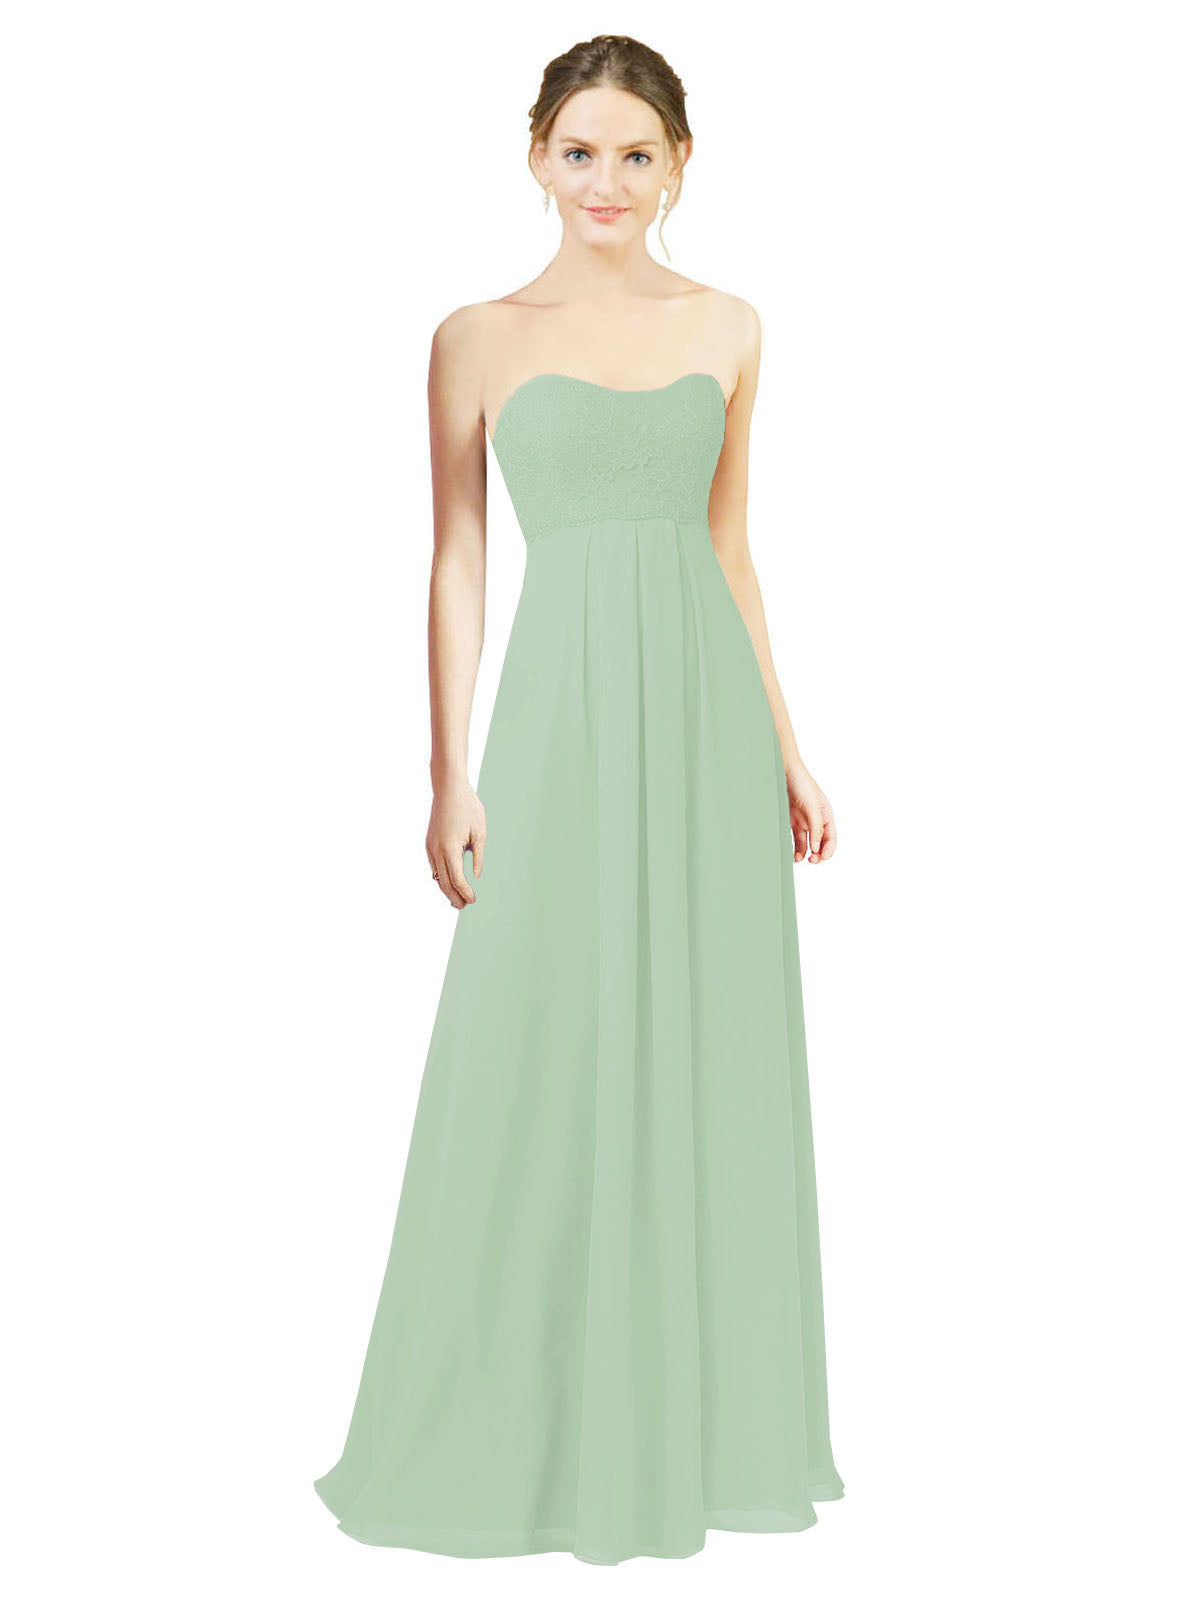 Sage A-Line Sweetheart Strapless Long Bridesmaid Dress Melany